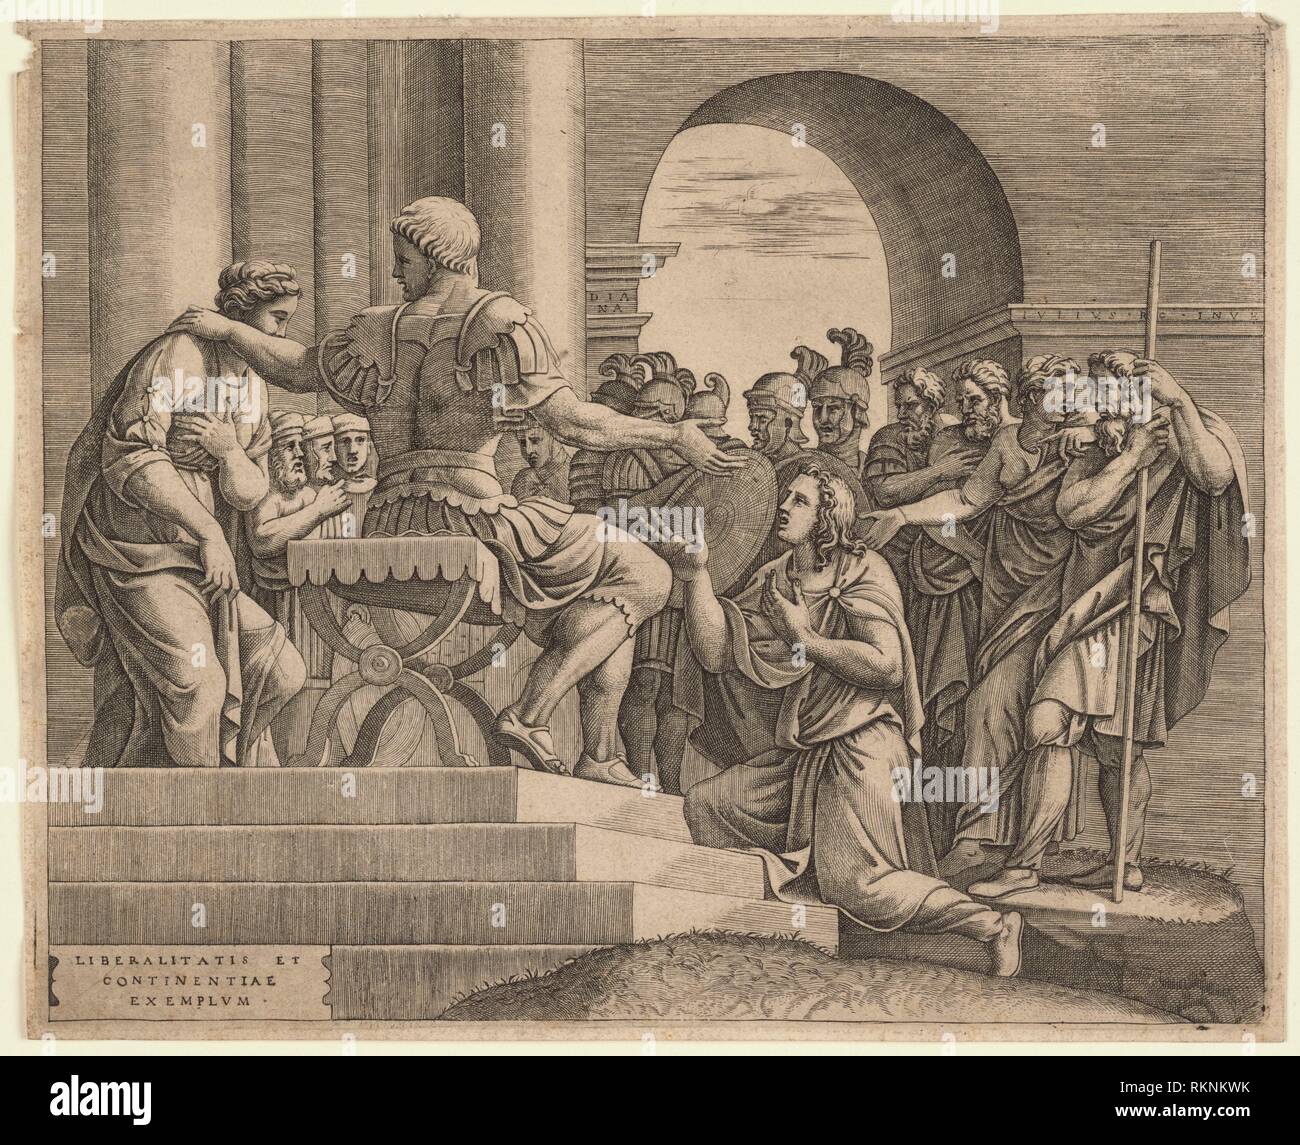 Continence of Scipio. Scultori, Diana, approximately 1545-approximately 1590 (Printmaker). Italian master prints. Date Created: 1545 - 1590 Stock Photo